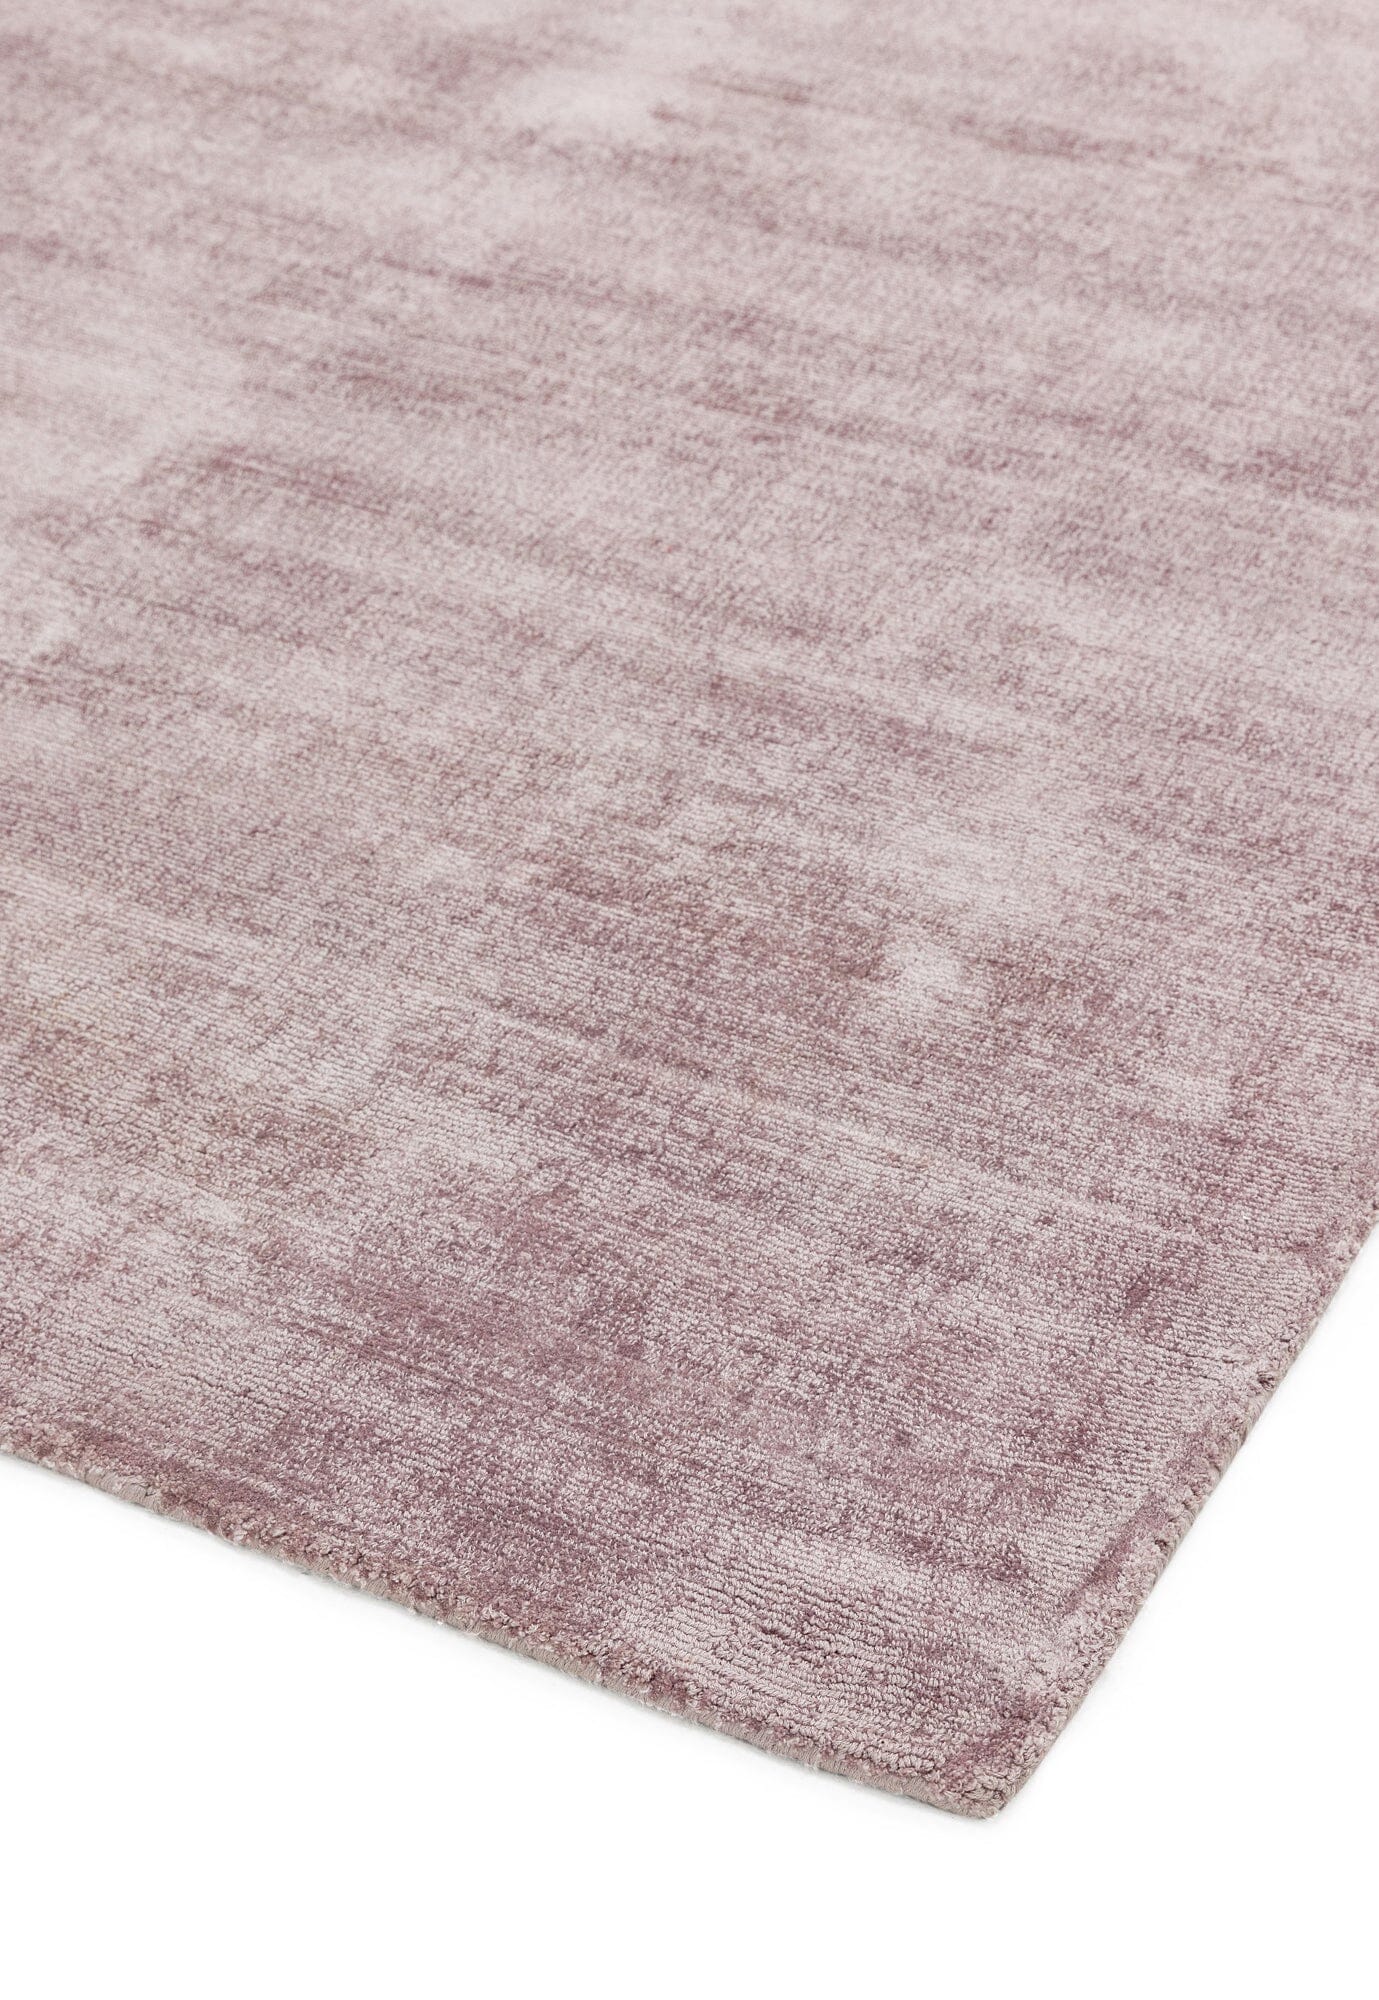  Asiatic Carpets-Asiatic Carpets Blade Hand Woven Runner Heather - 66 x 240cm-Purple 117 